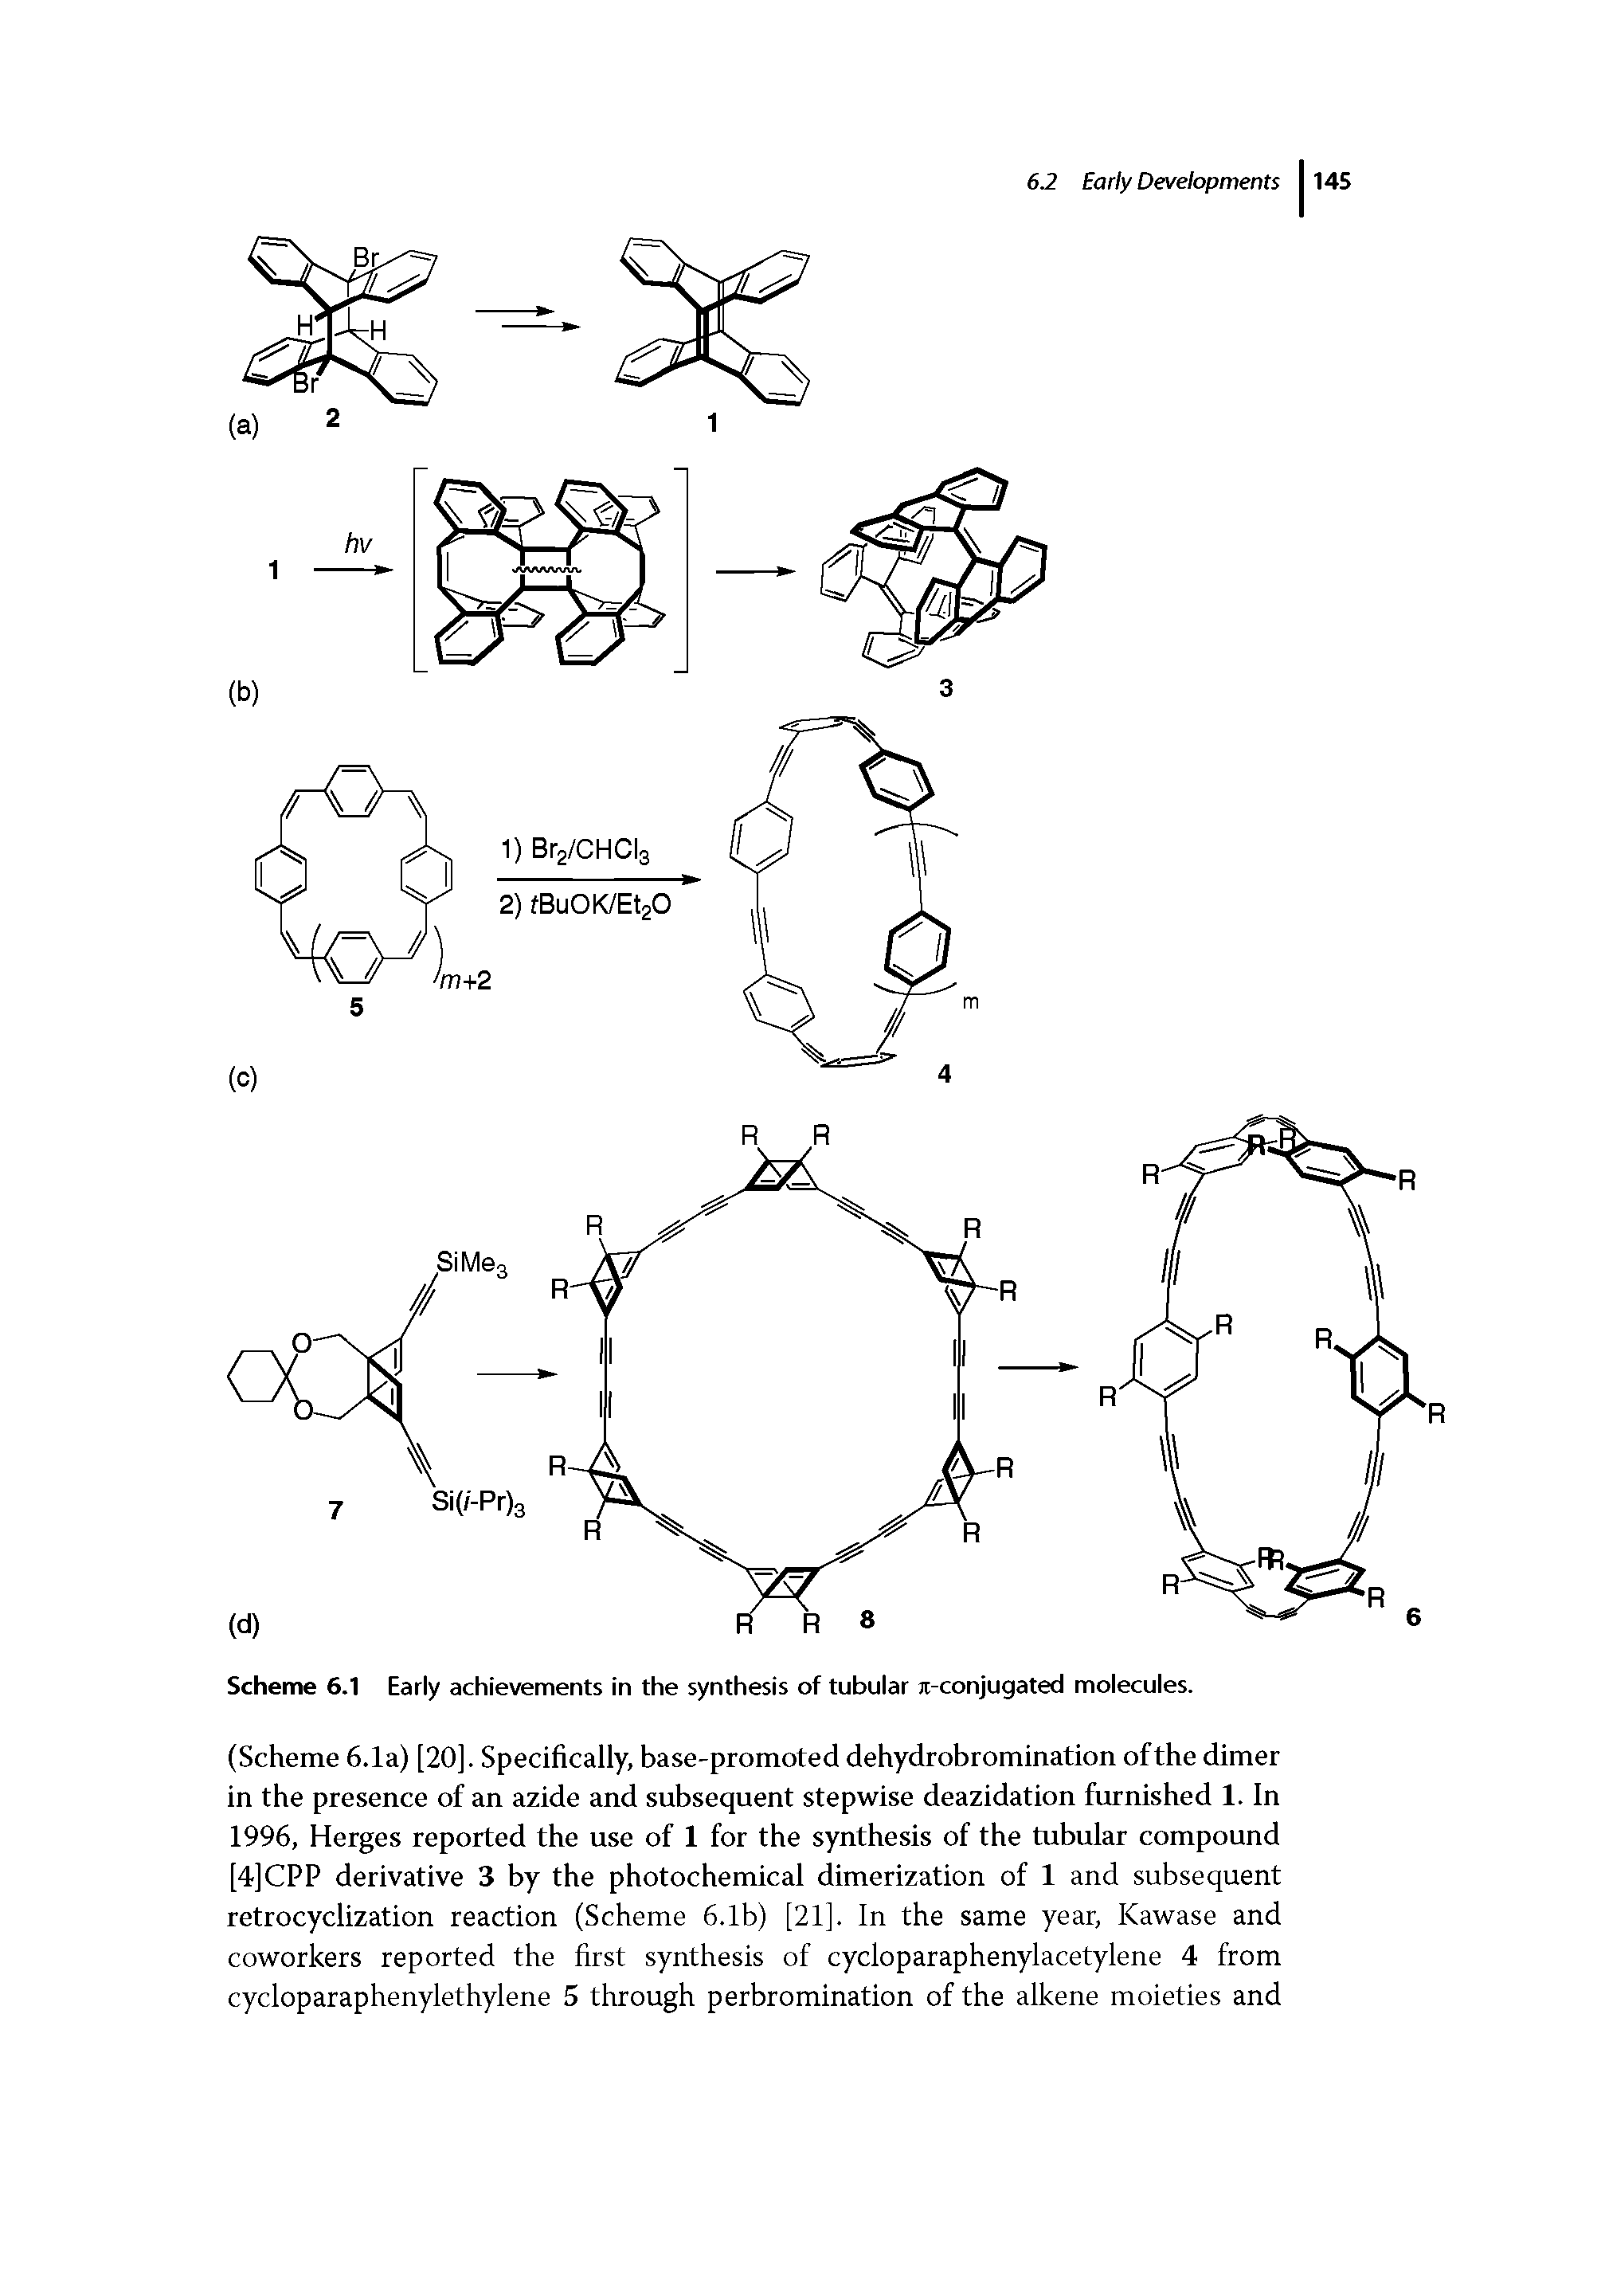 Scheme 6.1 Early achievements in the synthesis of tubular jt-conjugated molecules.